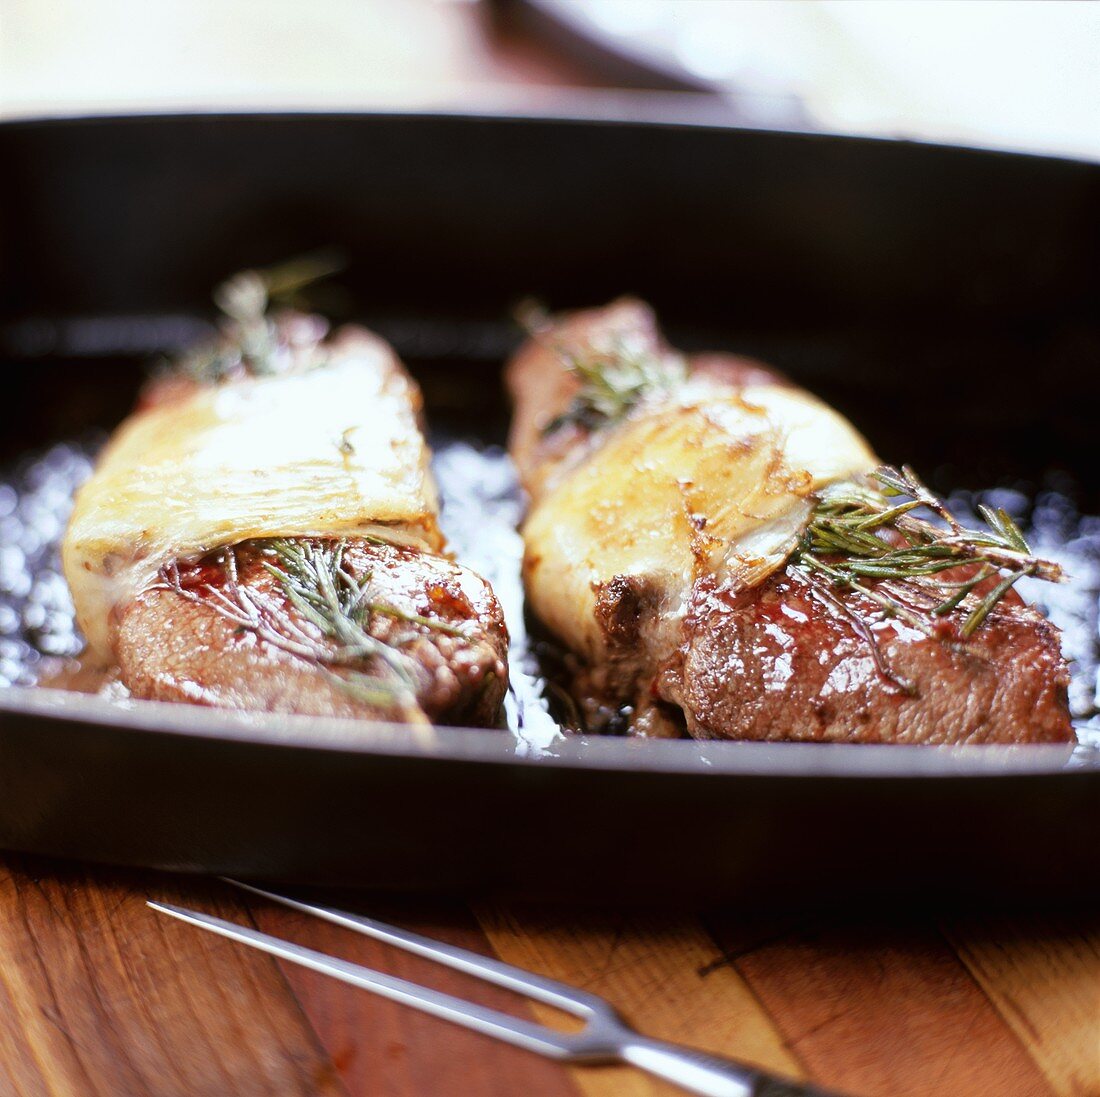 Steaks topped with rosemary and melted cheese